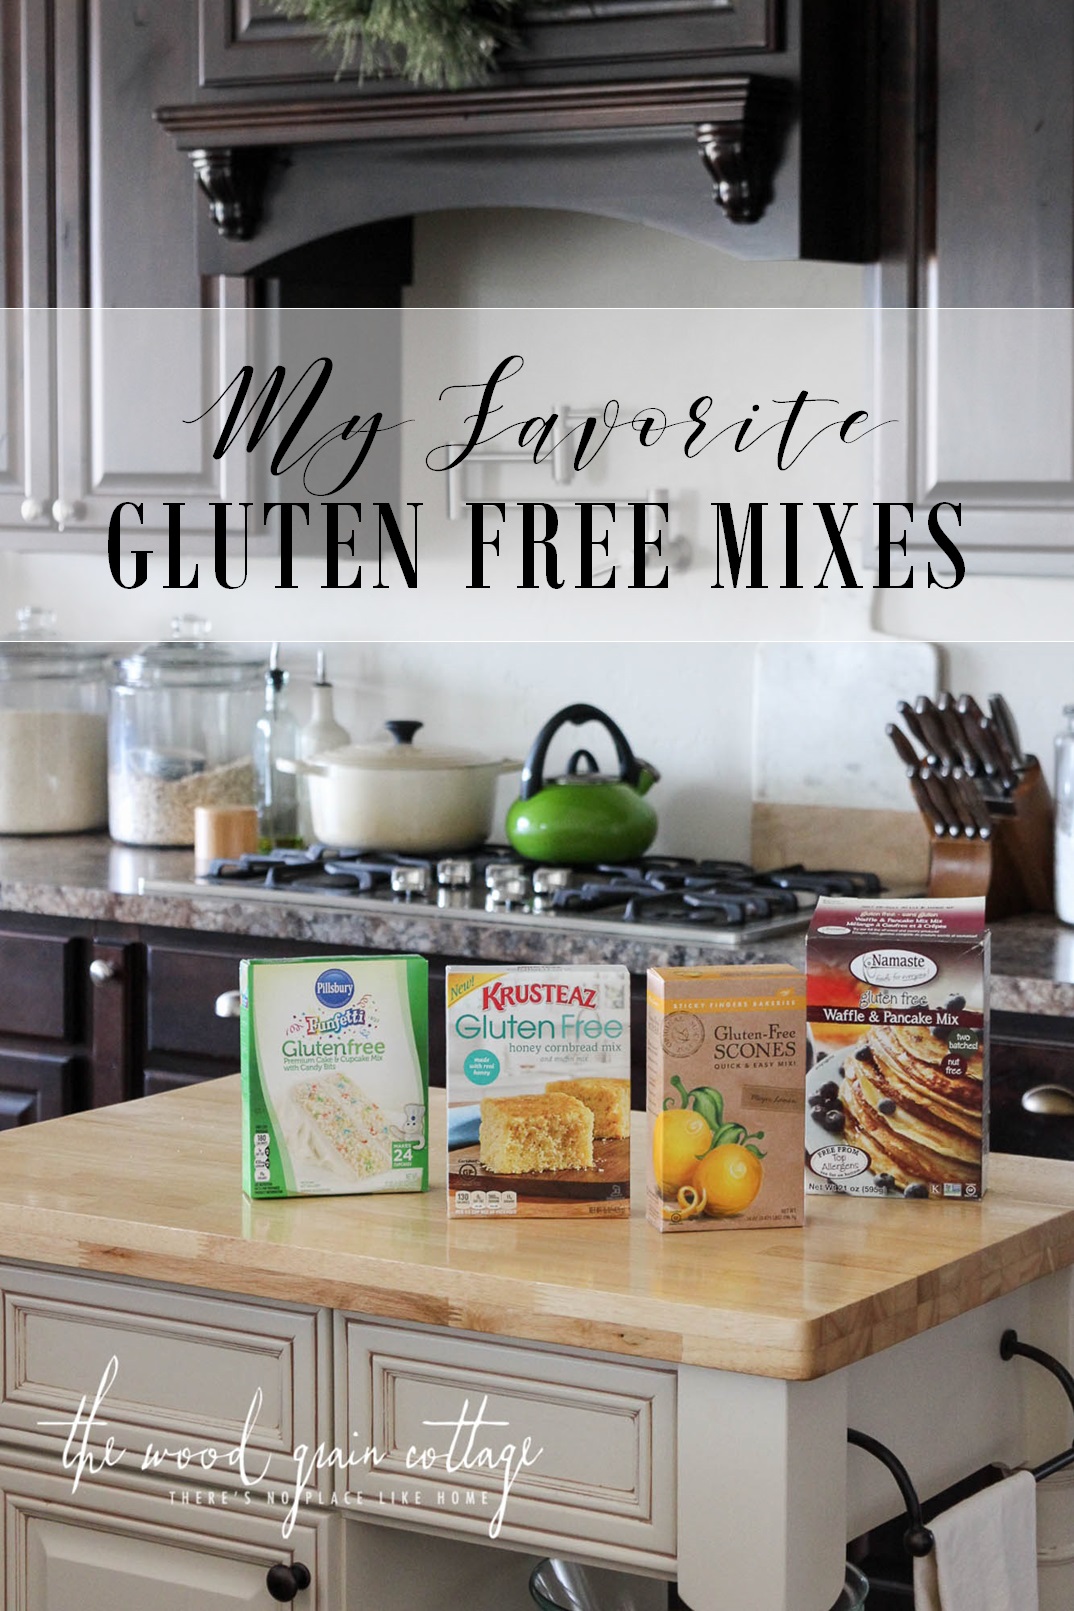 My Favorite Gluten Free Mixes by The Wood Grain Cottage